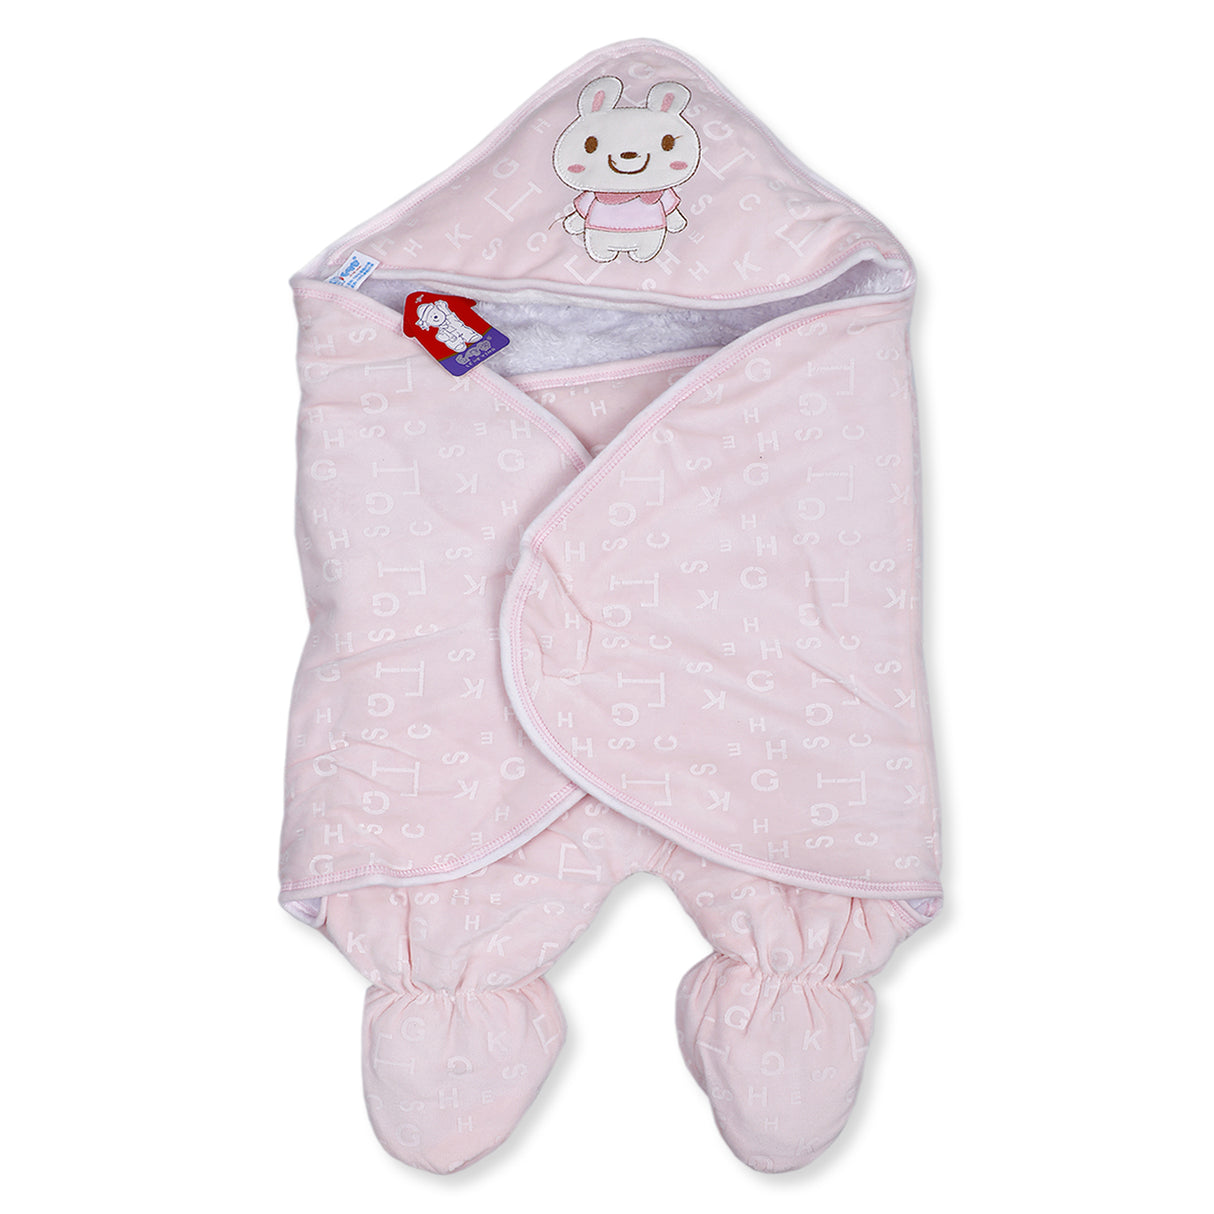 Adrolable Hooded Ready Swaddle